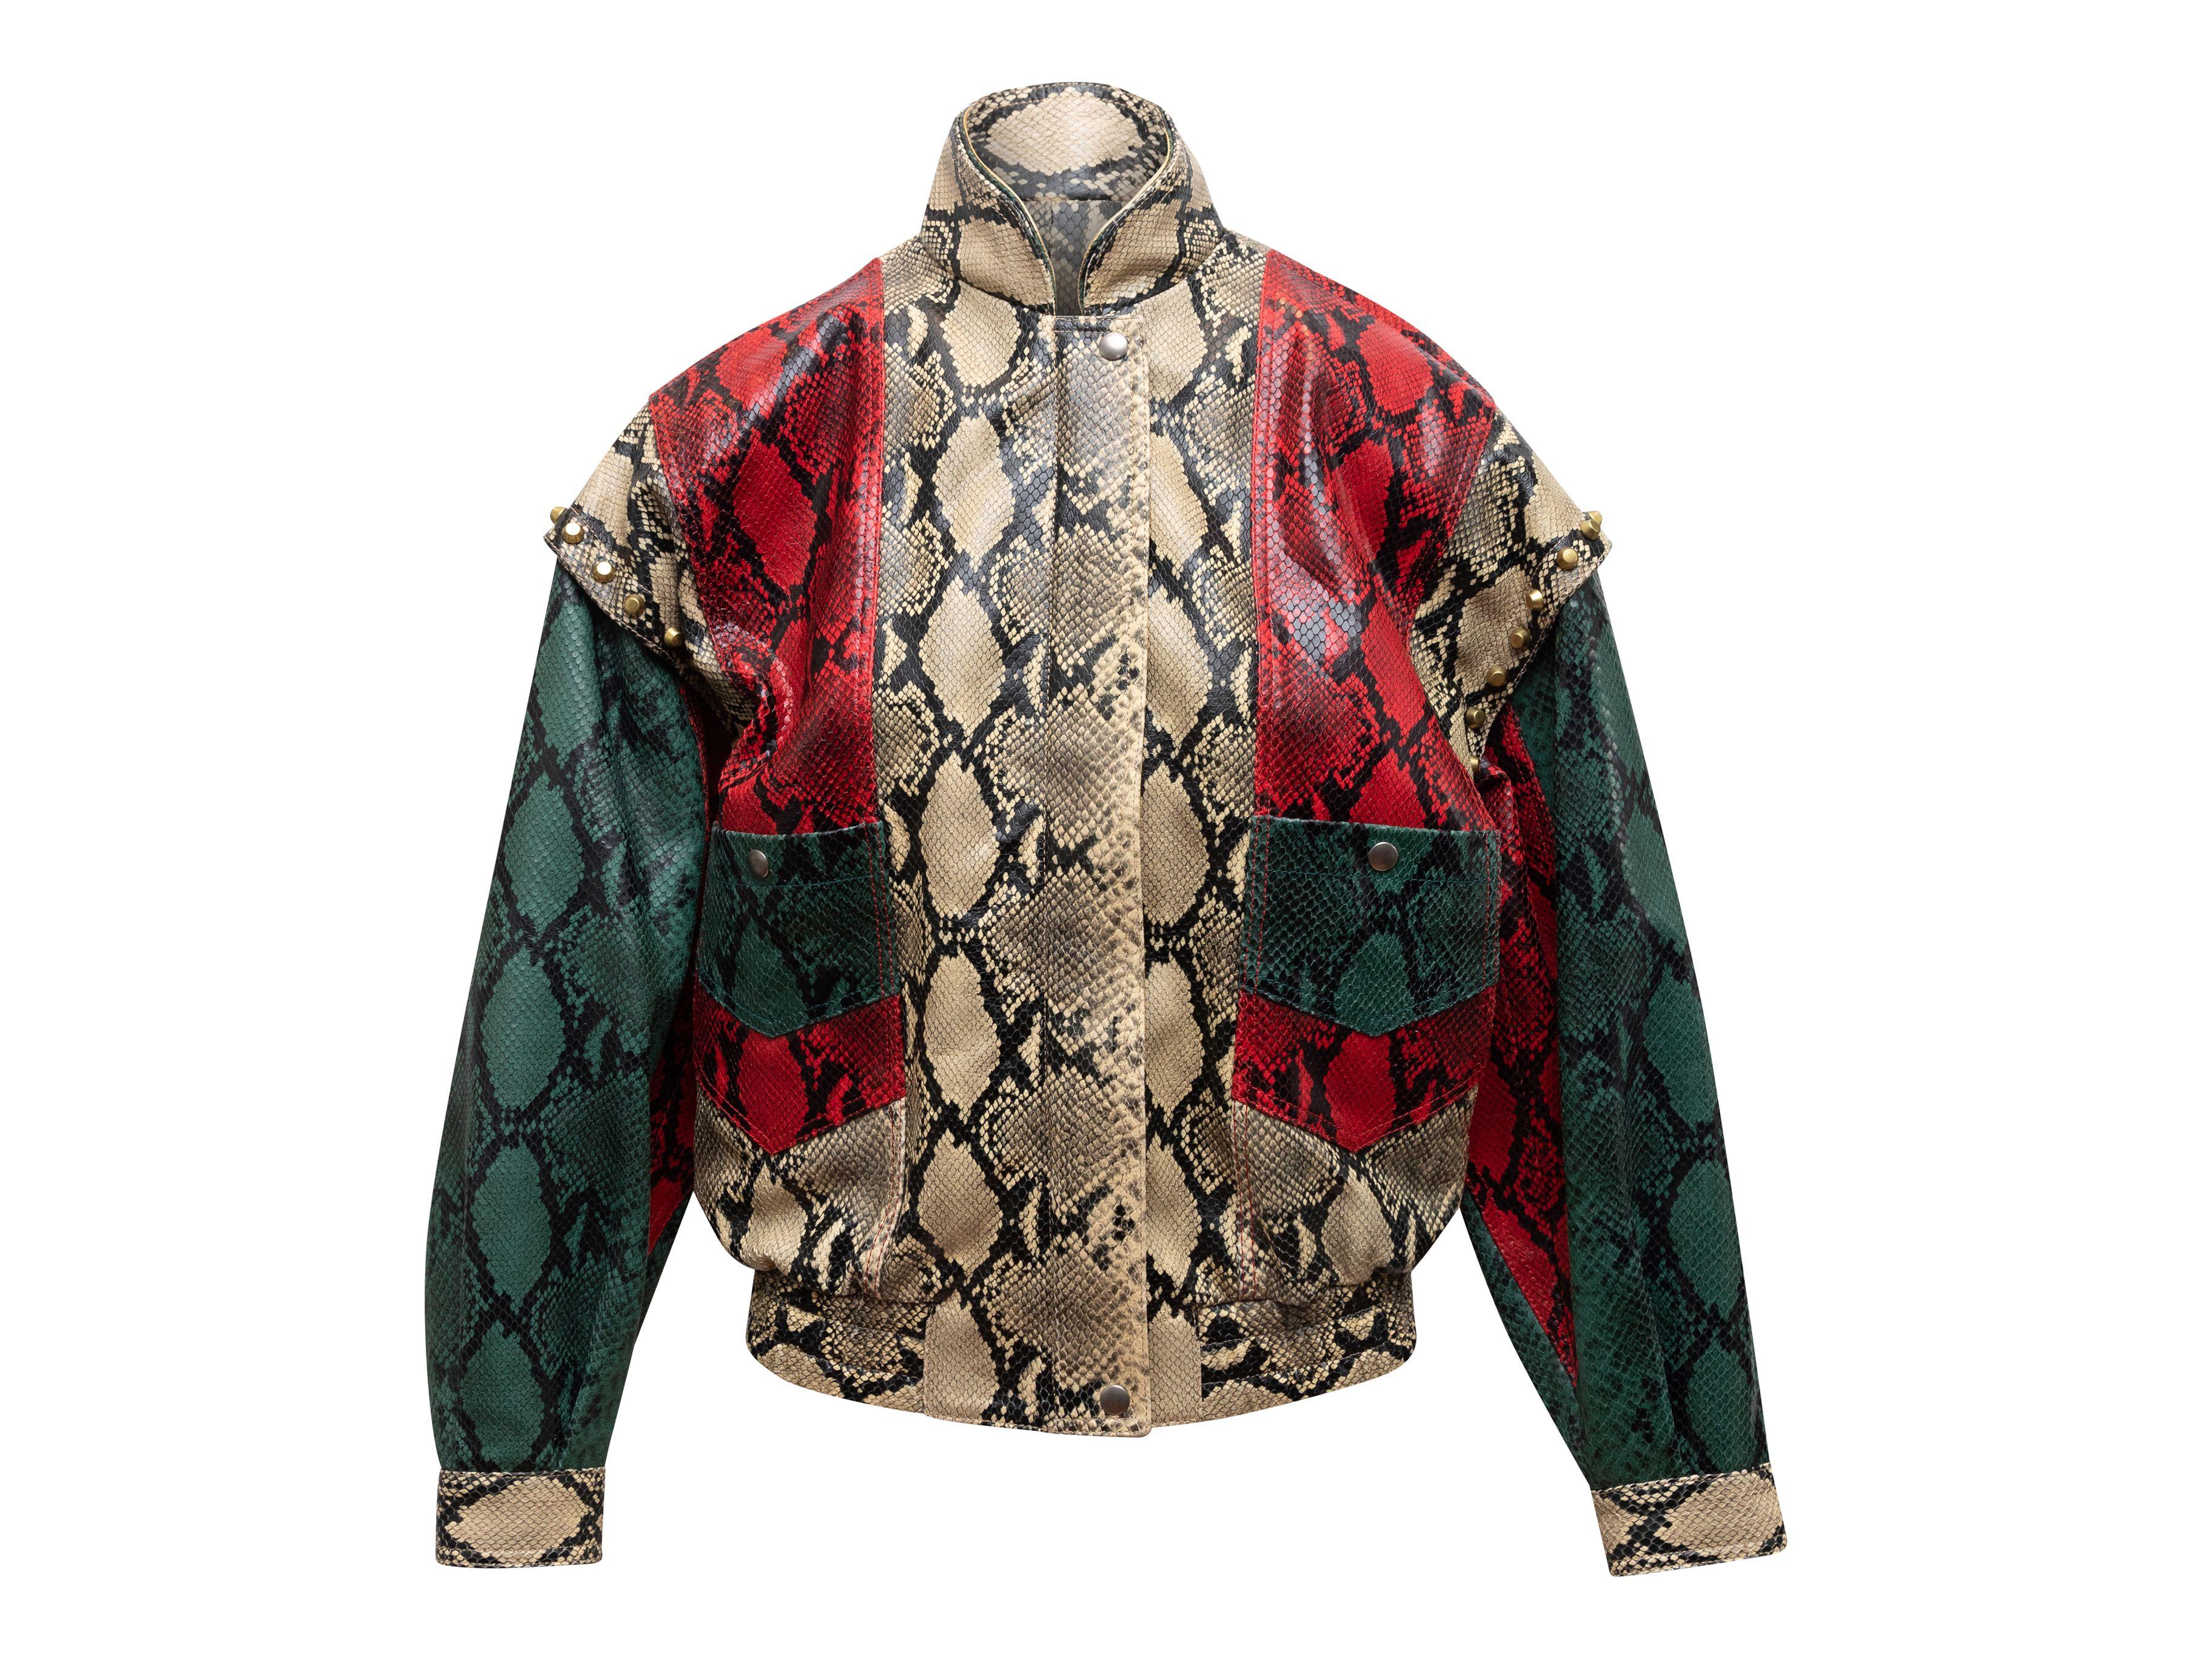 Gucci Tan & Multicolor Python Printed Leather Bomber Jacket 3